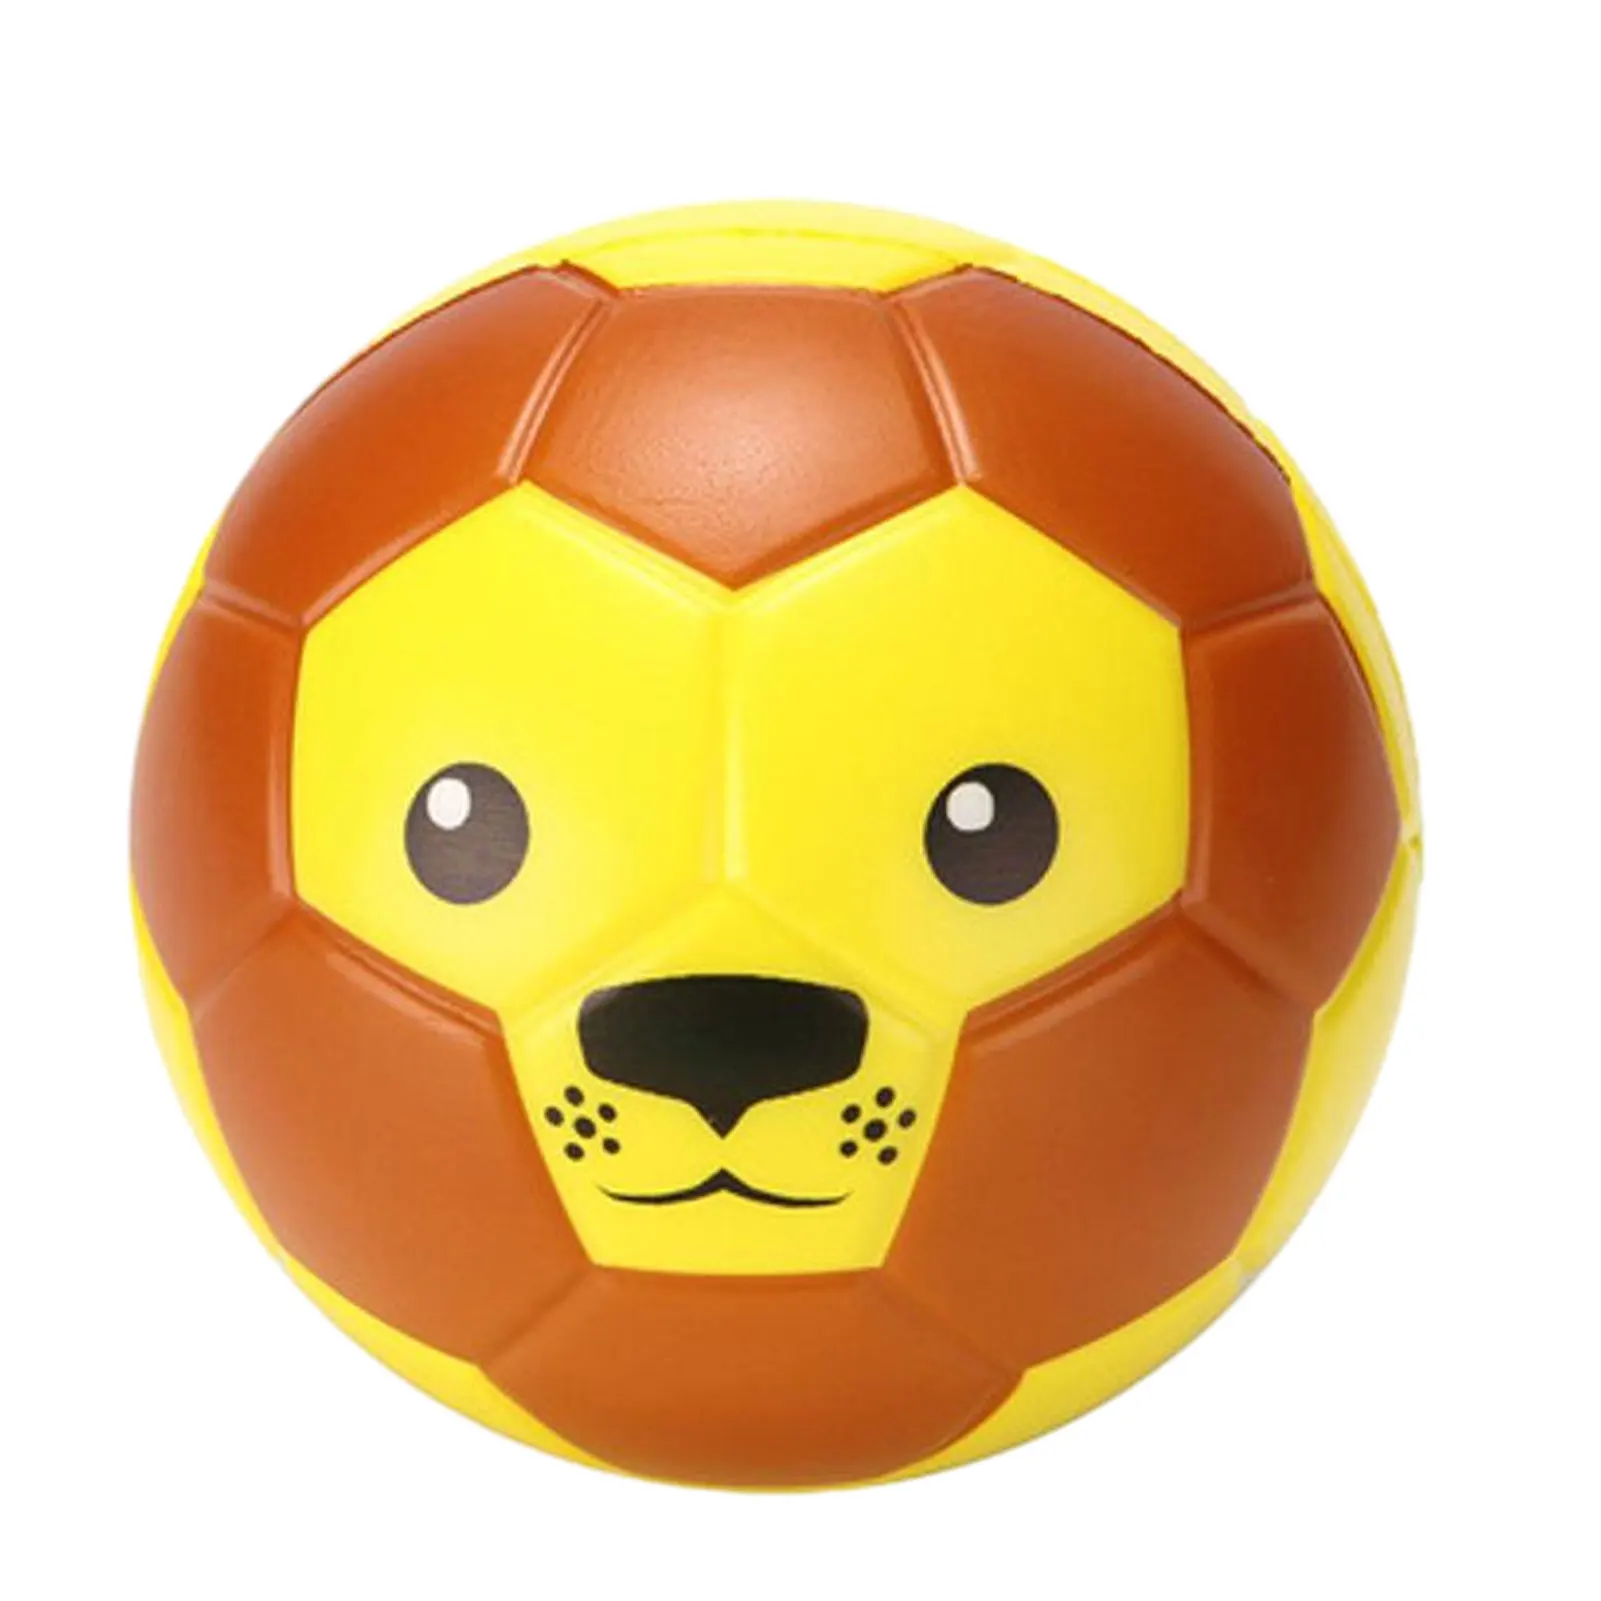 Animal Pattern Soccer Secure And Resilient Made Of PU Wide Applications Animal Patterns PU Football